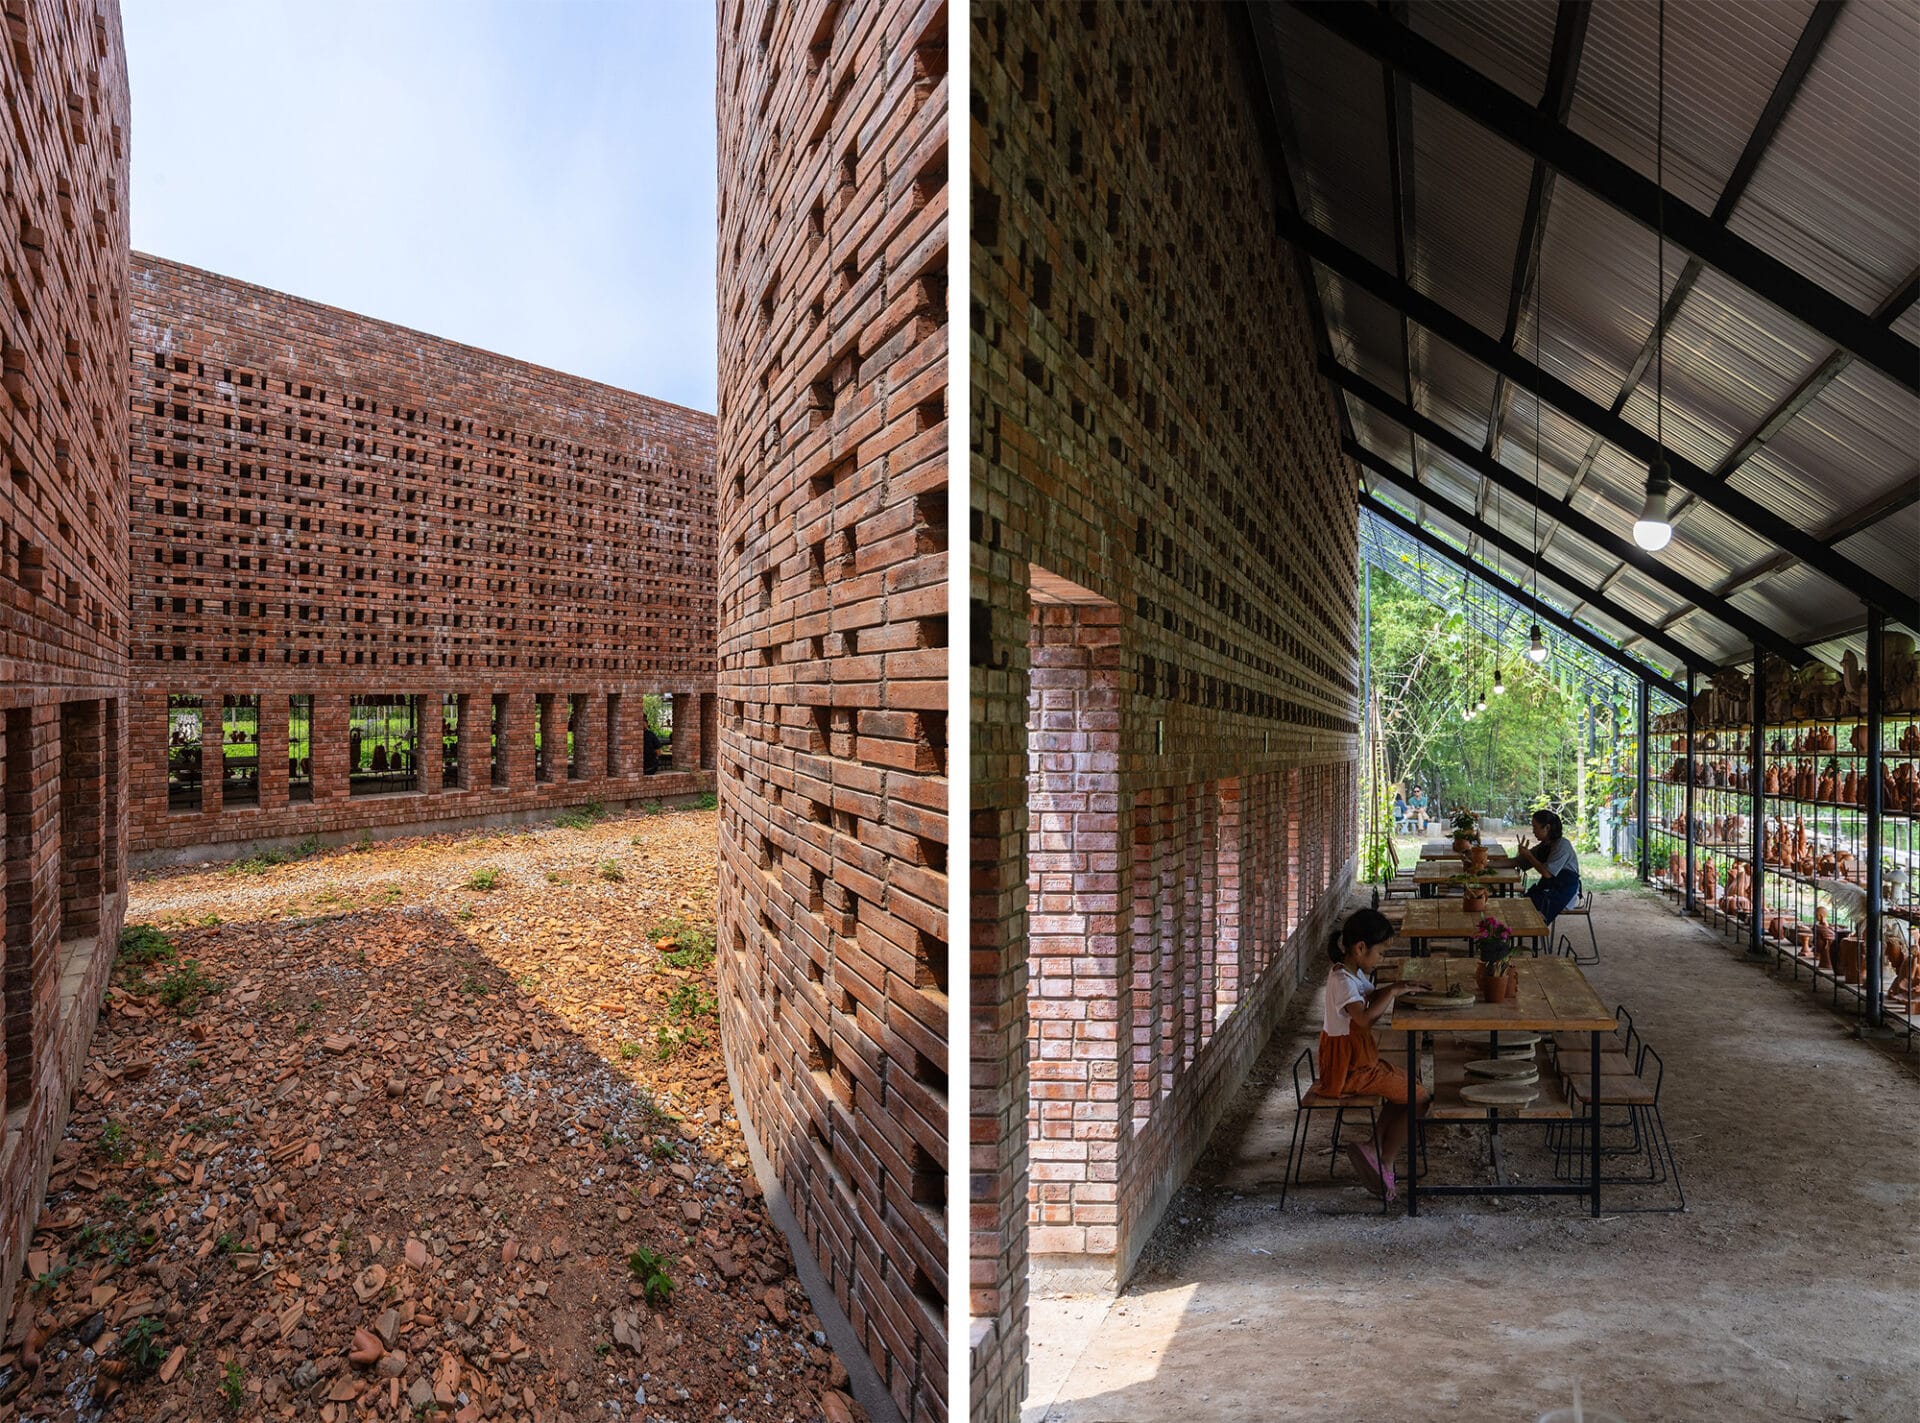 two images side-by-side of interior spaces in a contemporary brick building housing a terra cotta workshop